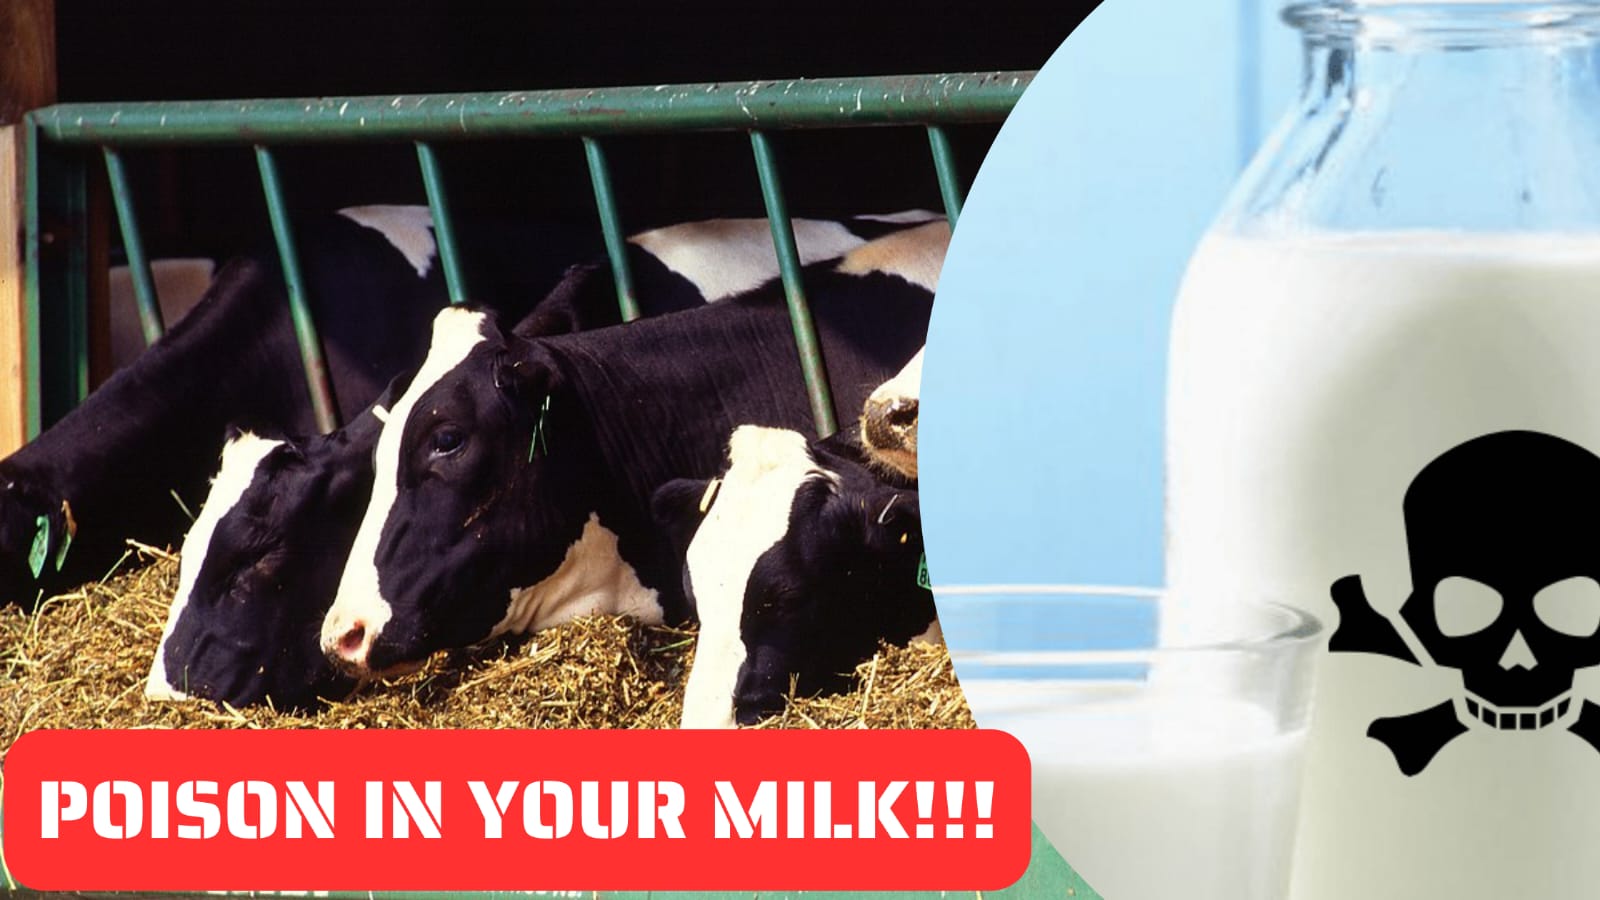 BIG ALERT!!! The Shocking Truth About American Milk Banned Across the Globe!!!